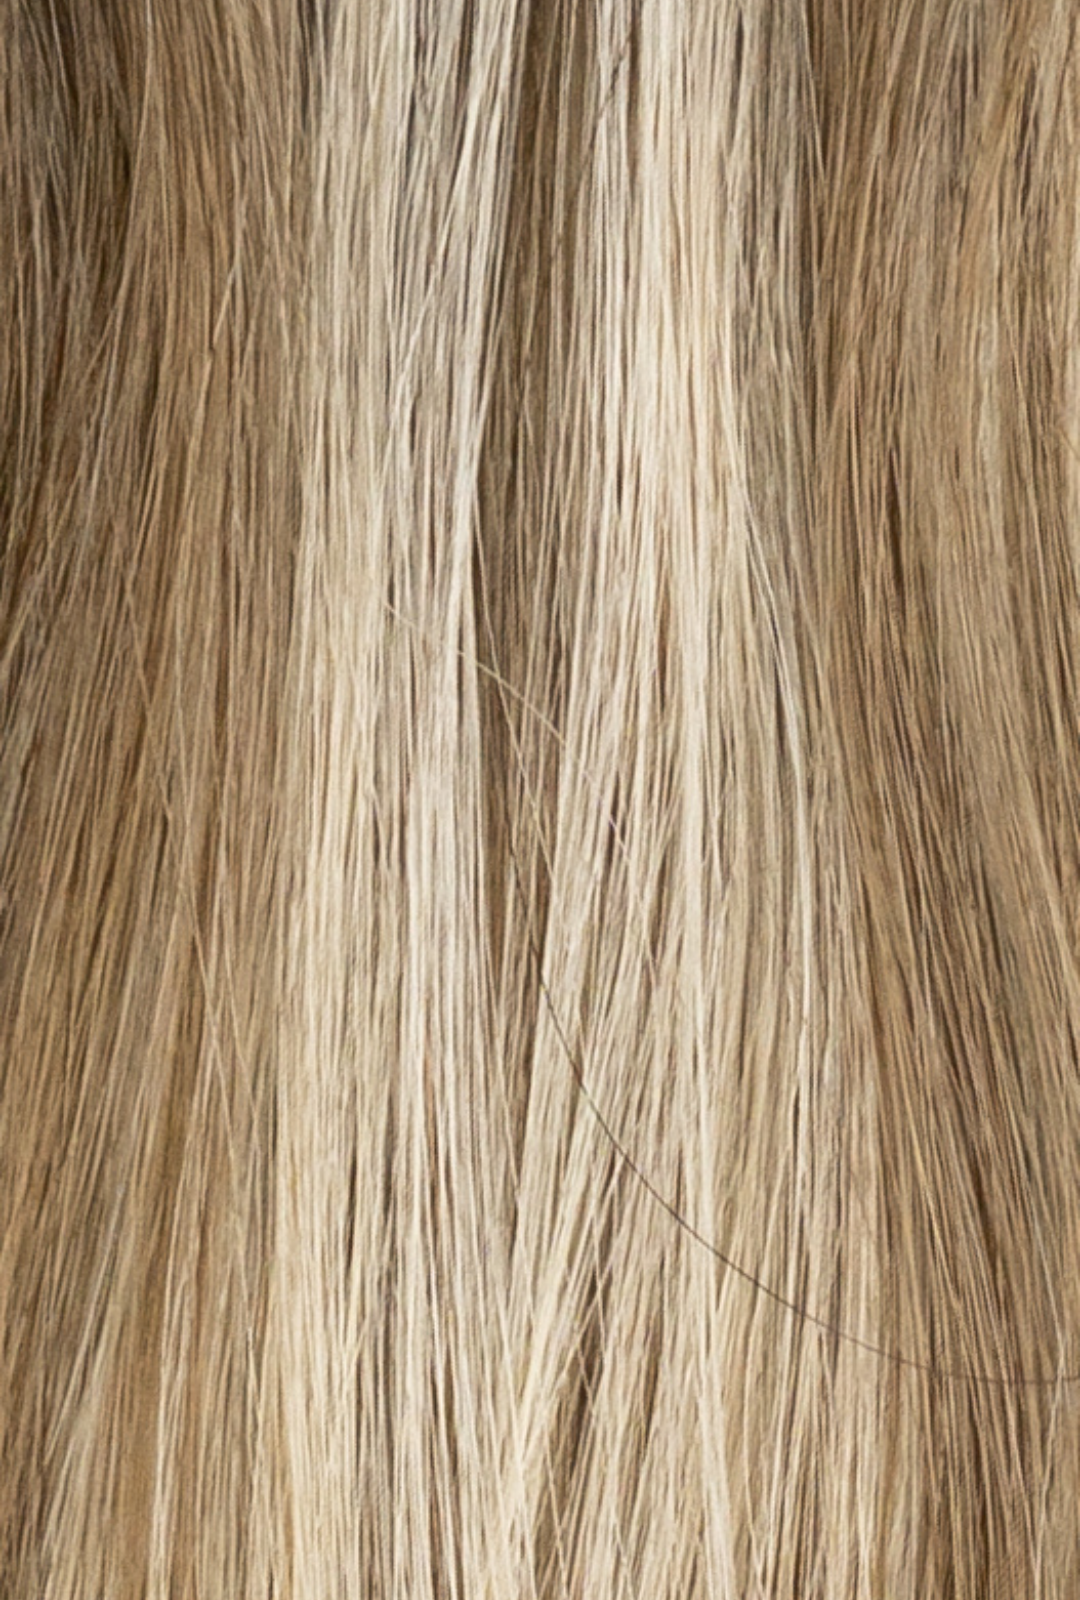 Laced Hair Machine Sewn Weft Extensions Dimensional #8/60